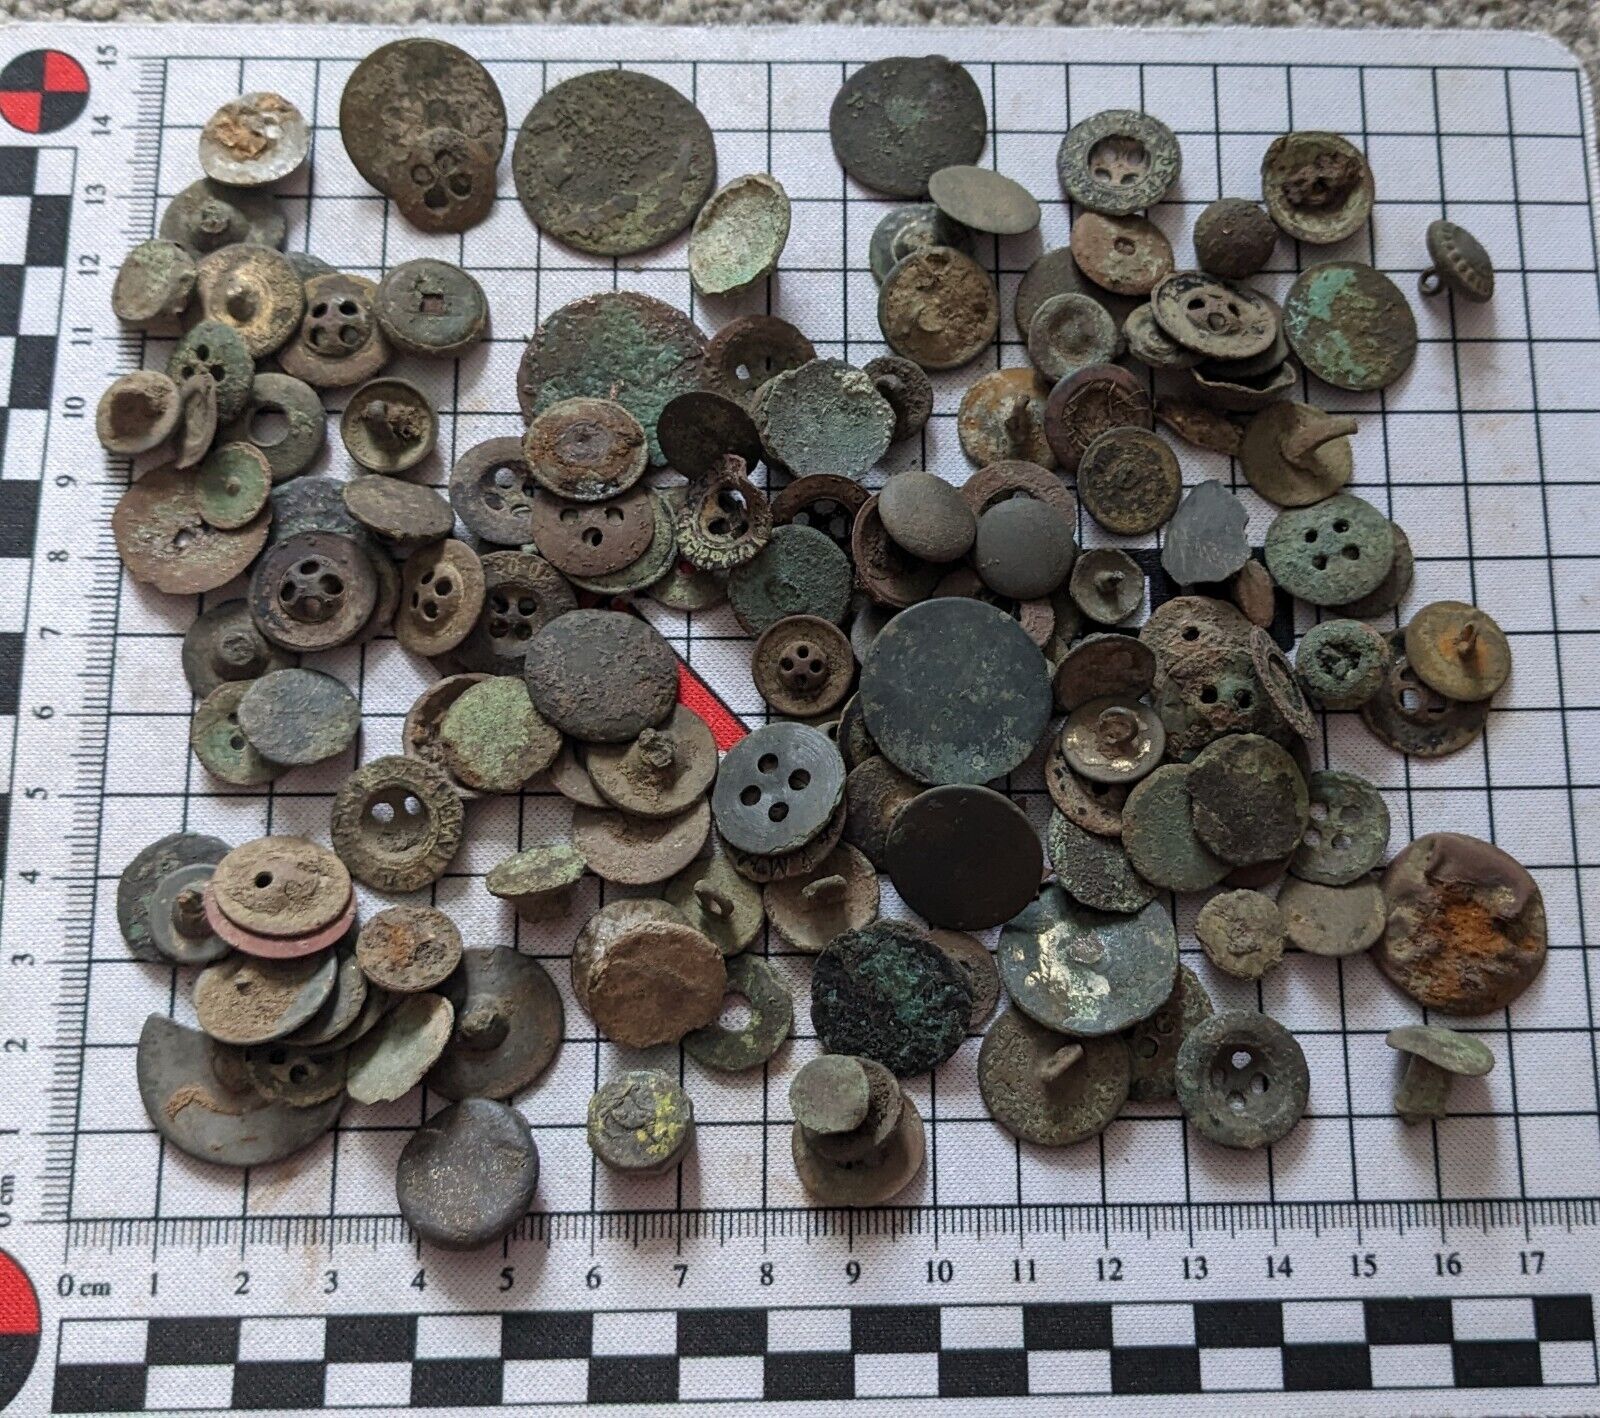 Job lot of old buttons found metal detecting. 